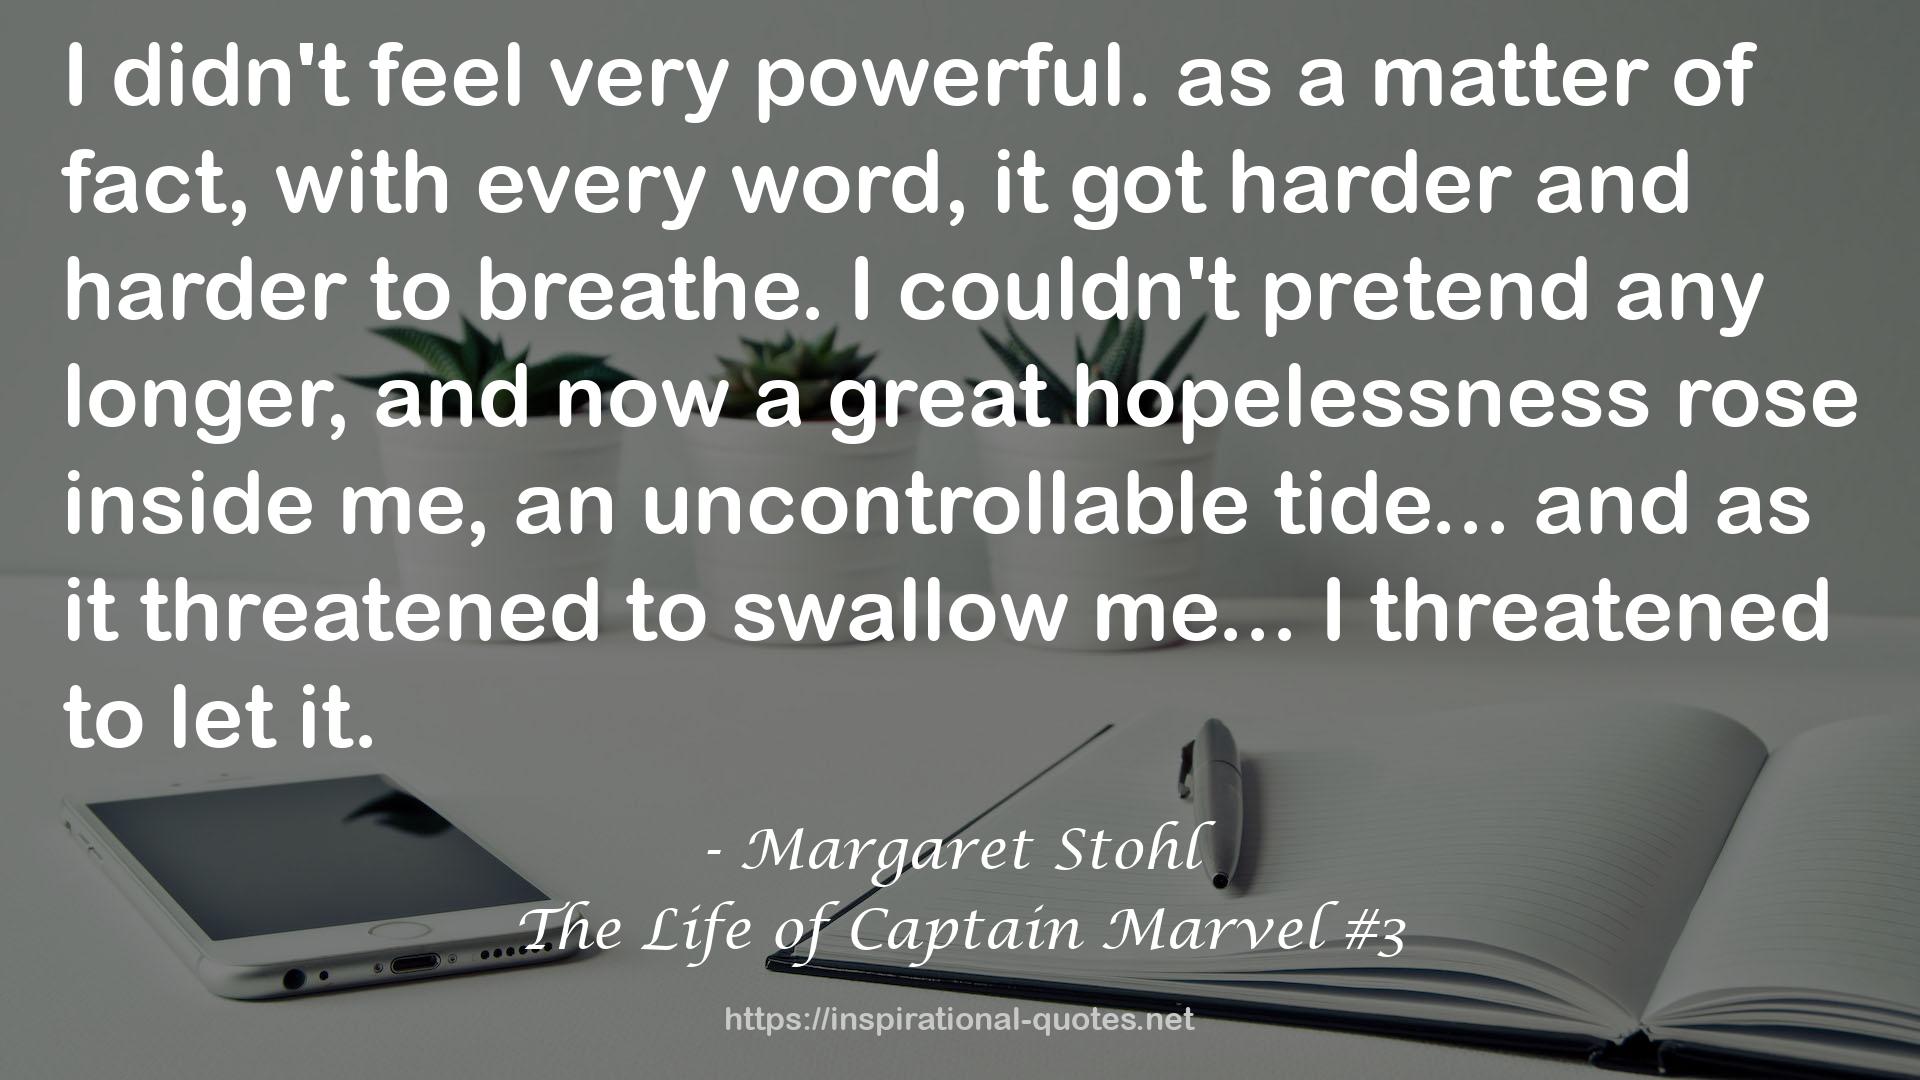 The Life of Captain Marvel #3 QUOTES